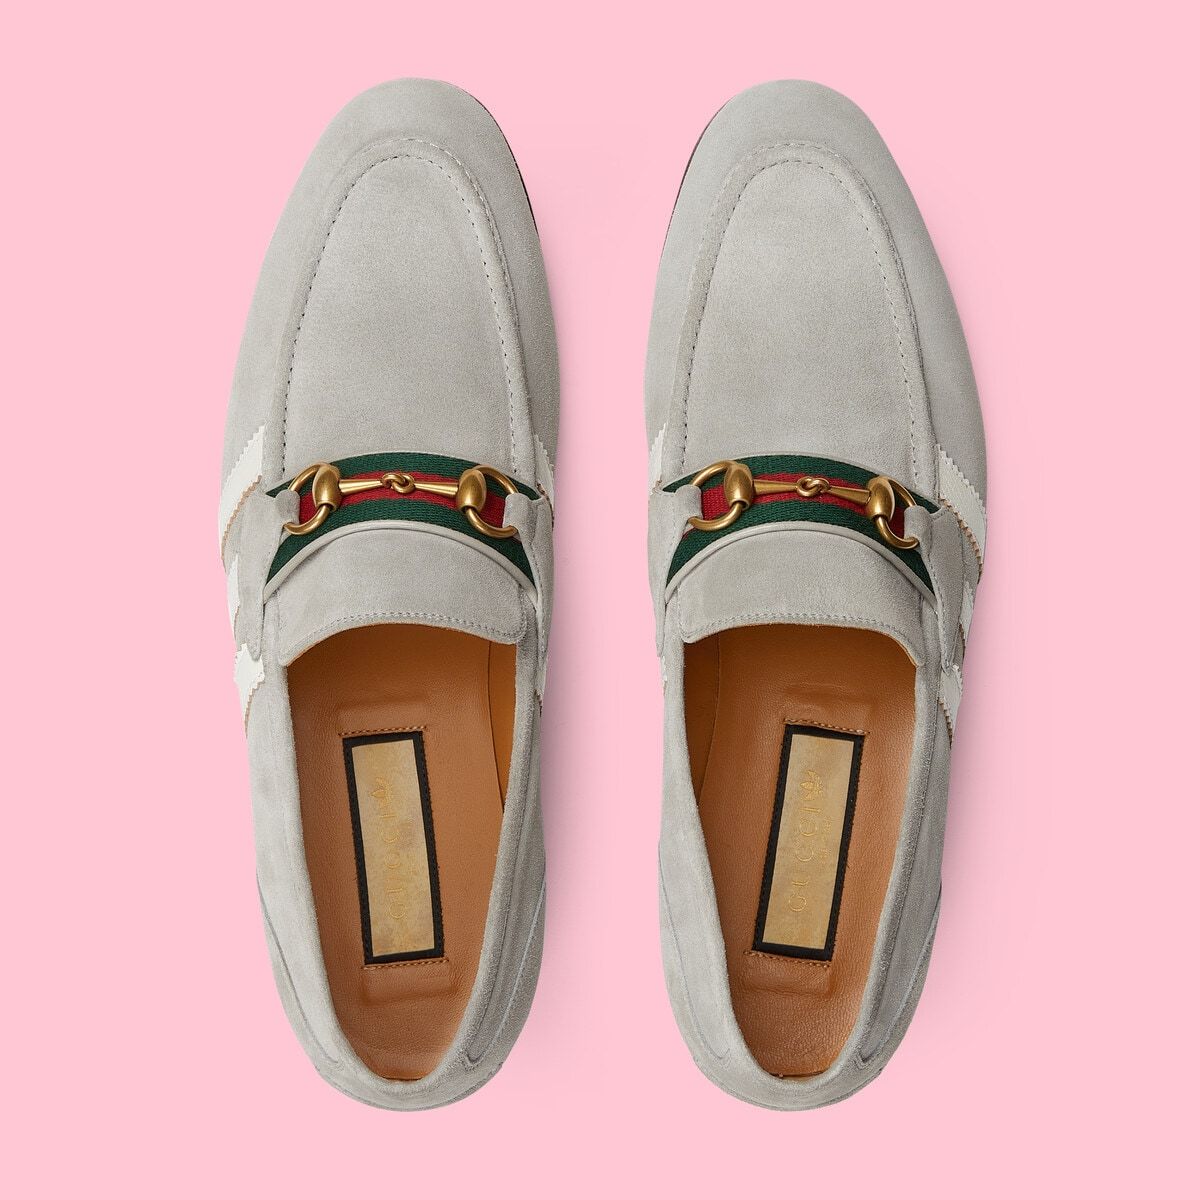 Giày Nam Adidas X Gucci Loafer 'Grey Suede' 702283-1DPM0-1470 – LUXITY